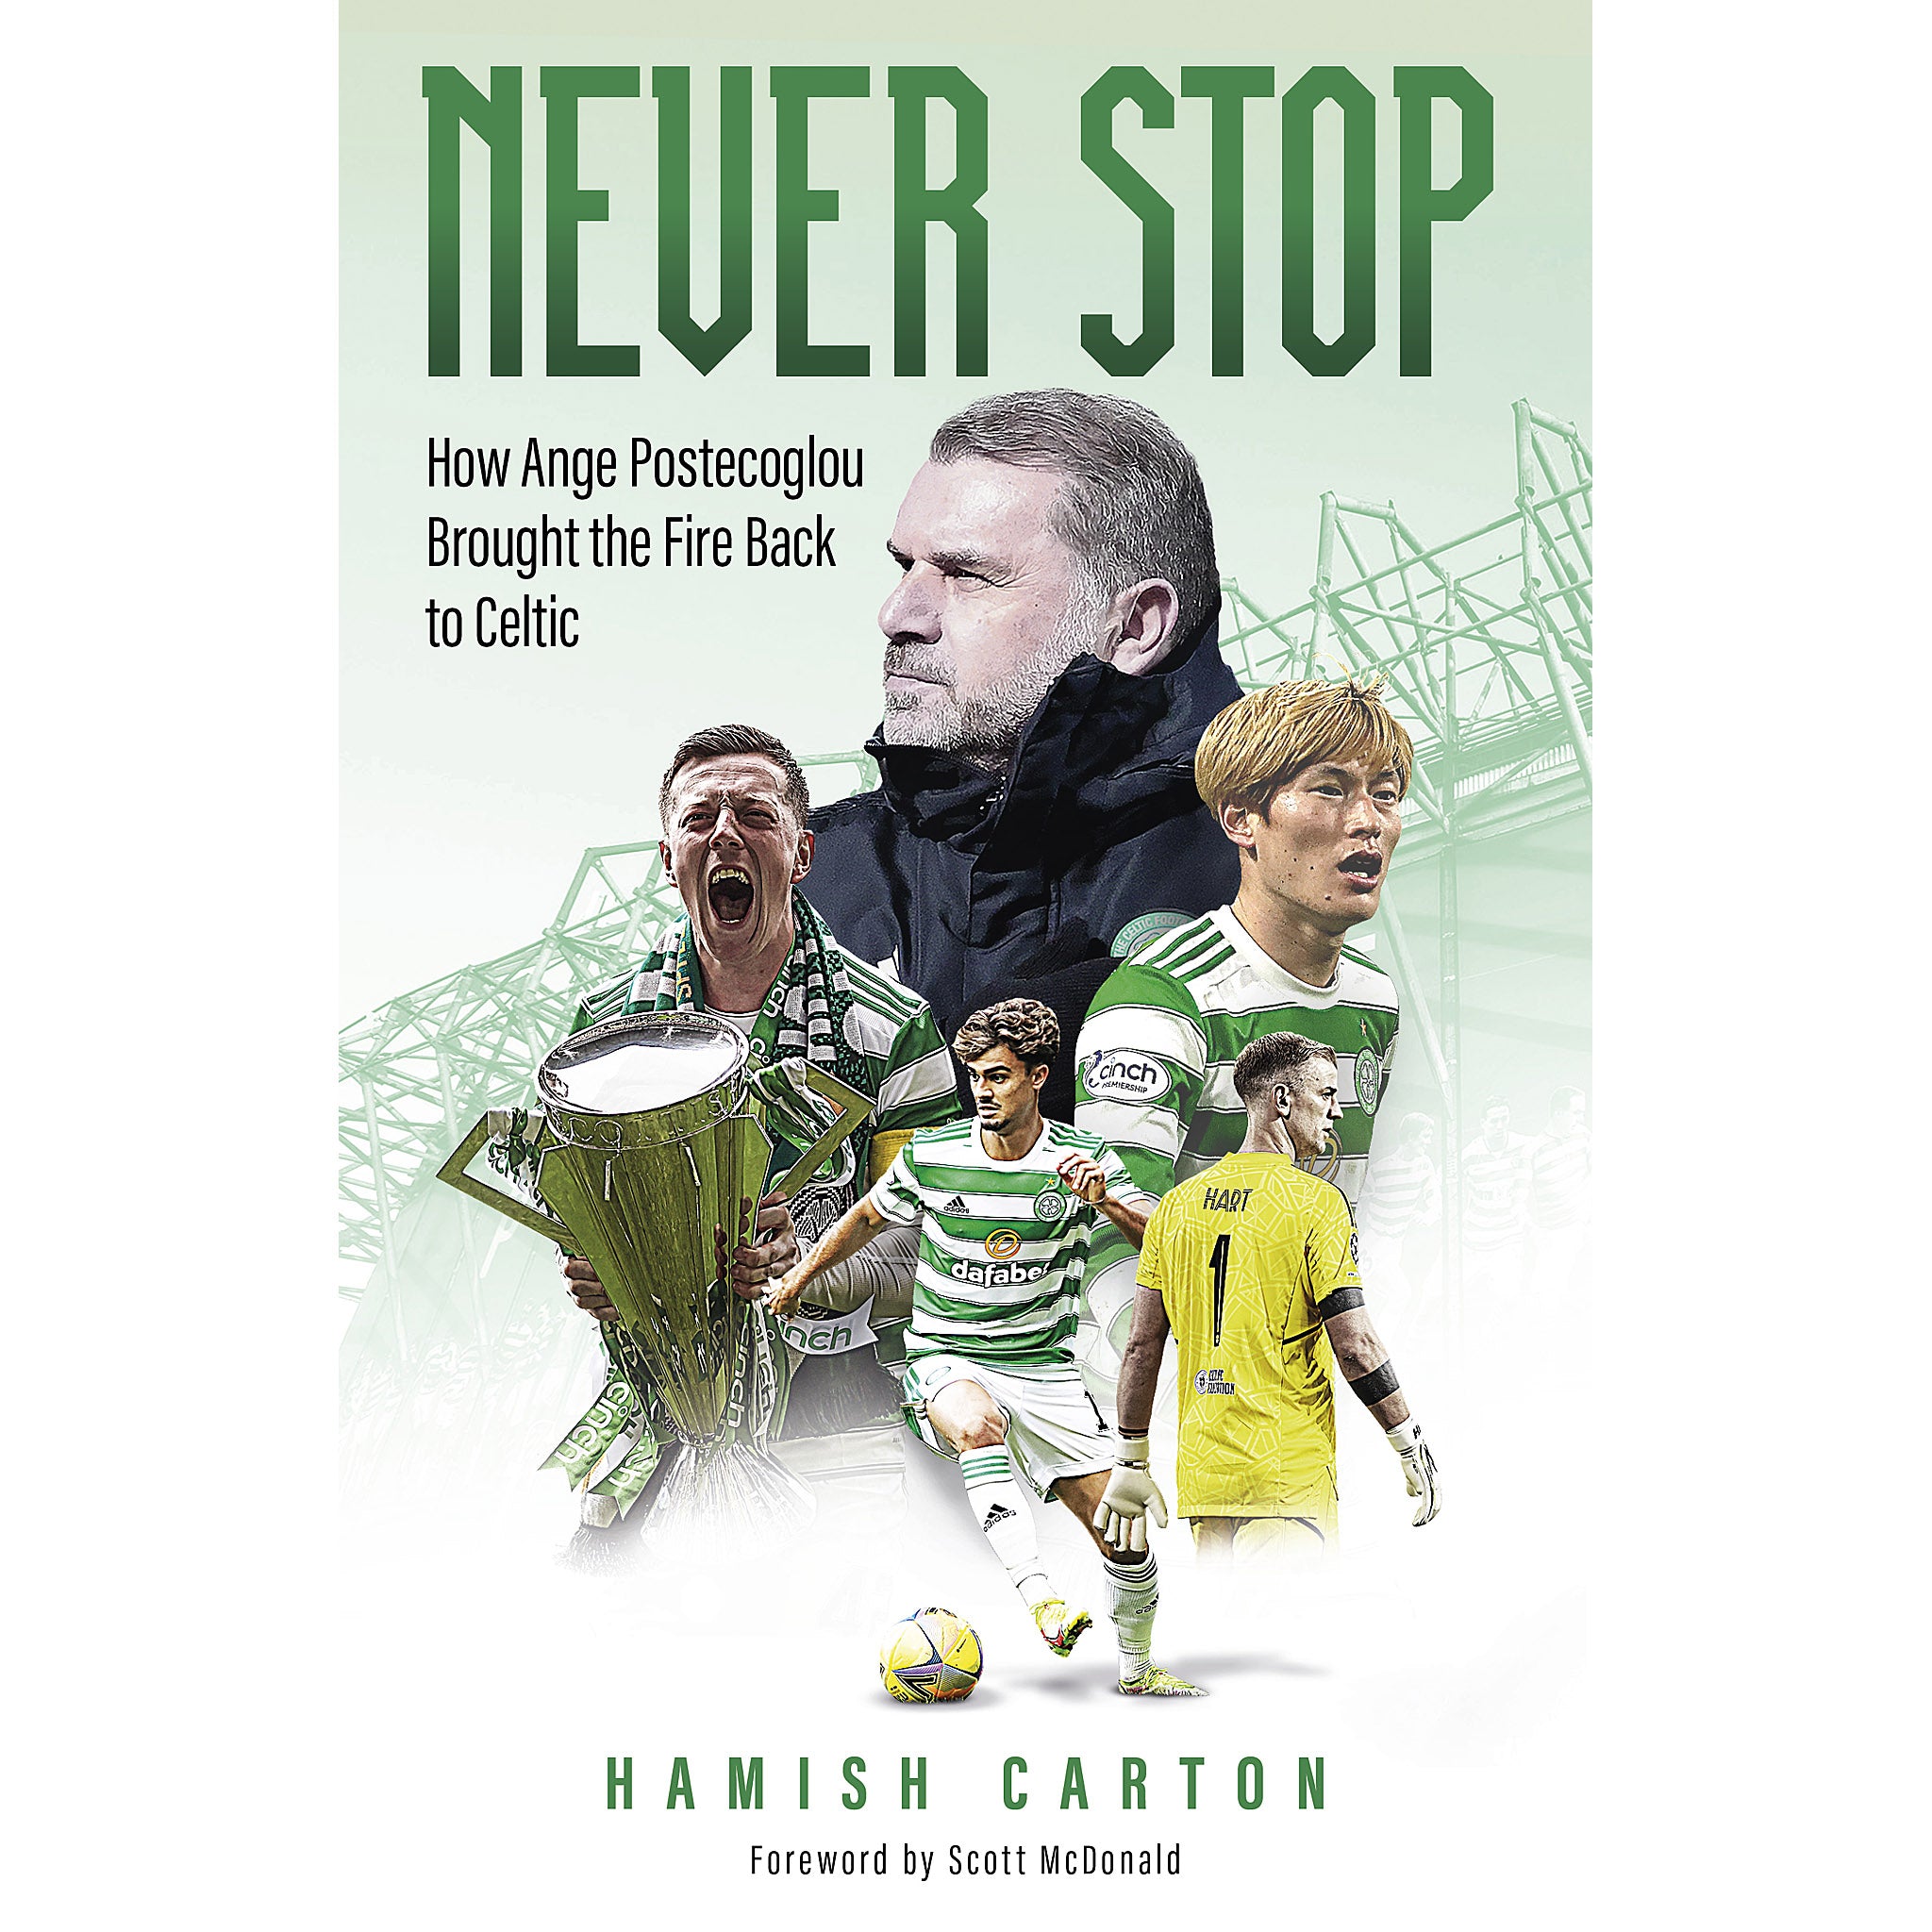 Never Stop – How Ange Postecoglou Brought the Fire Back to Celtic